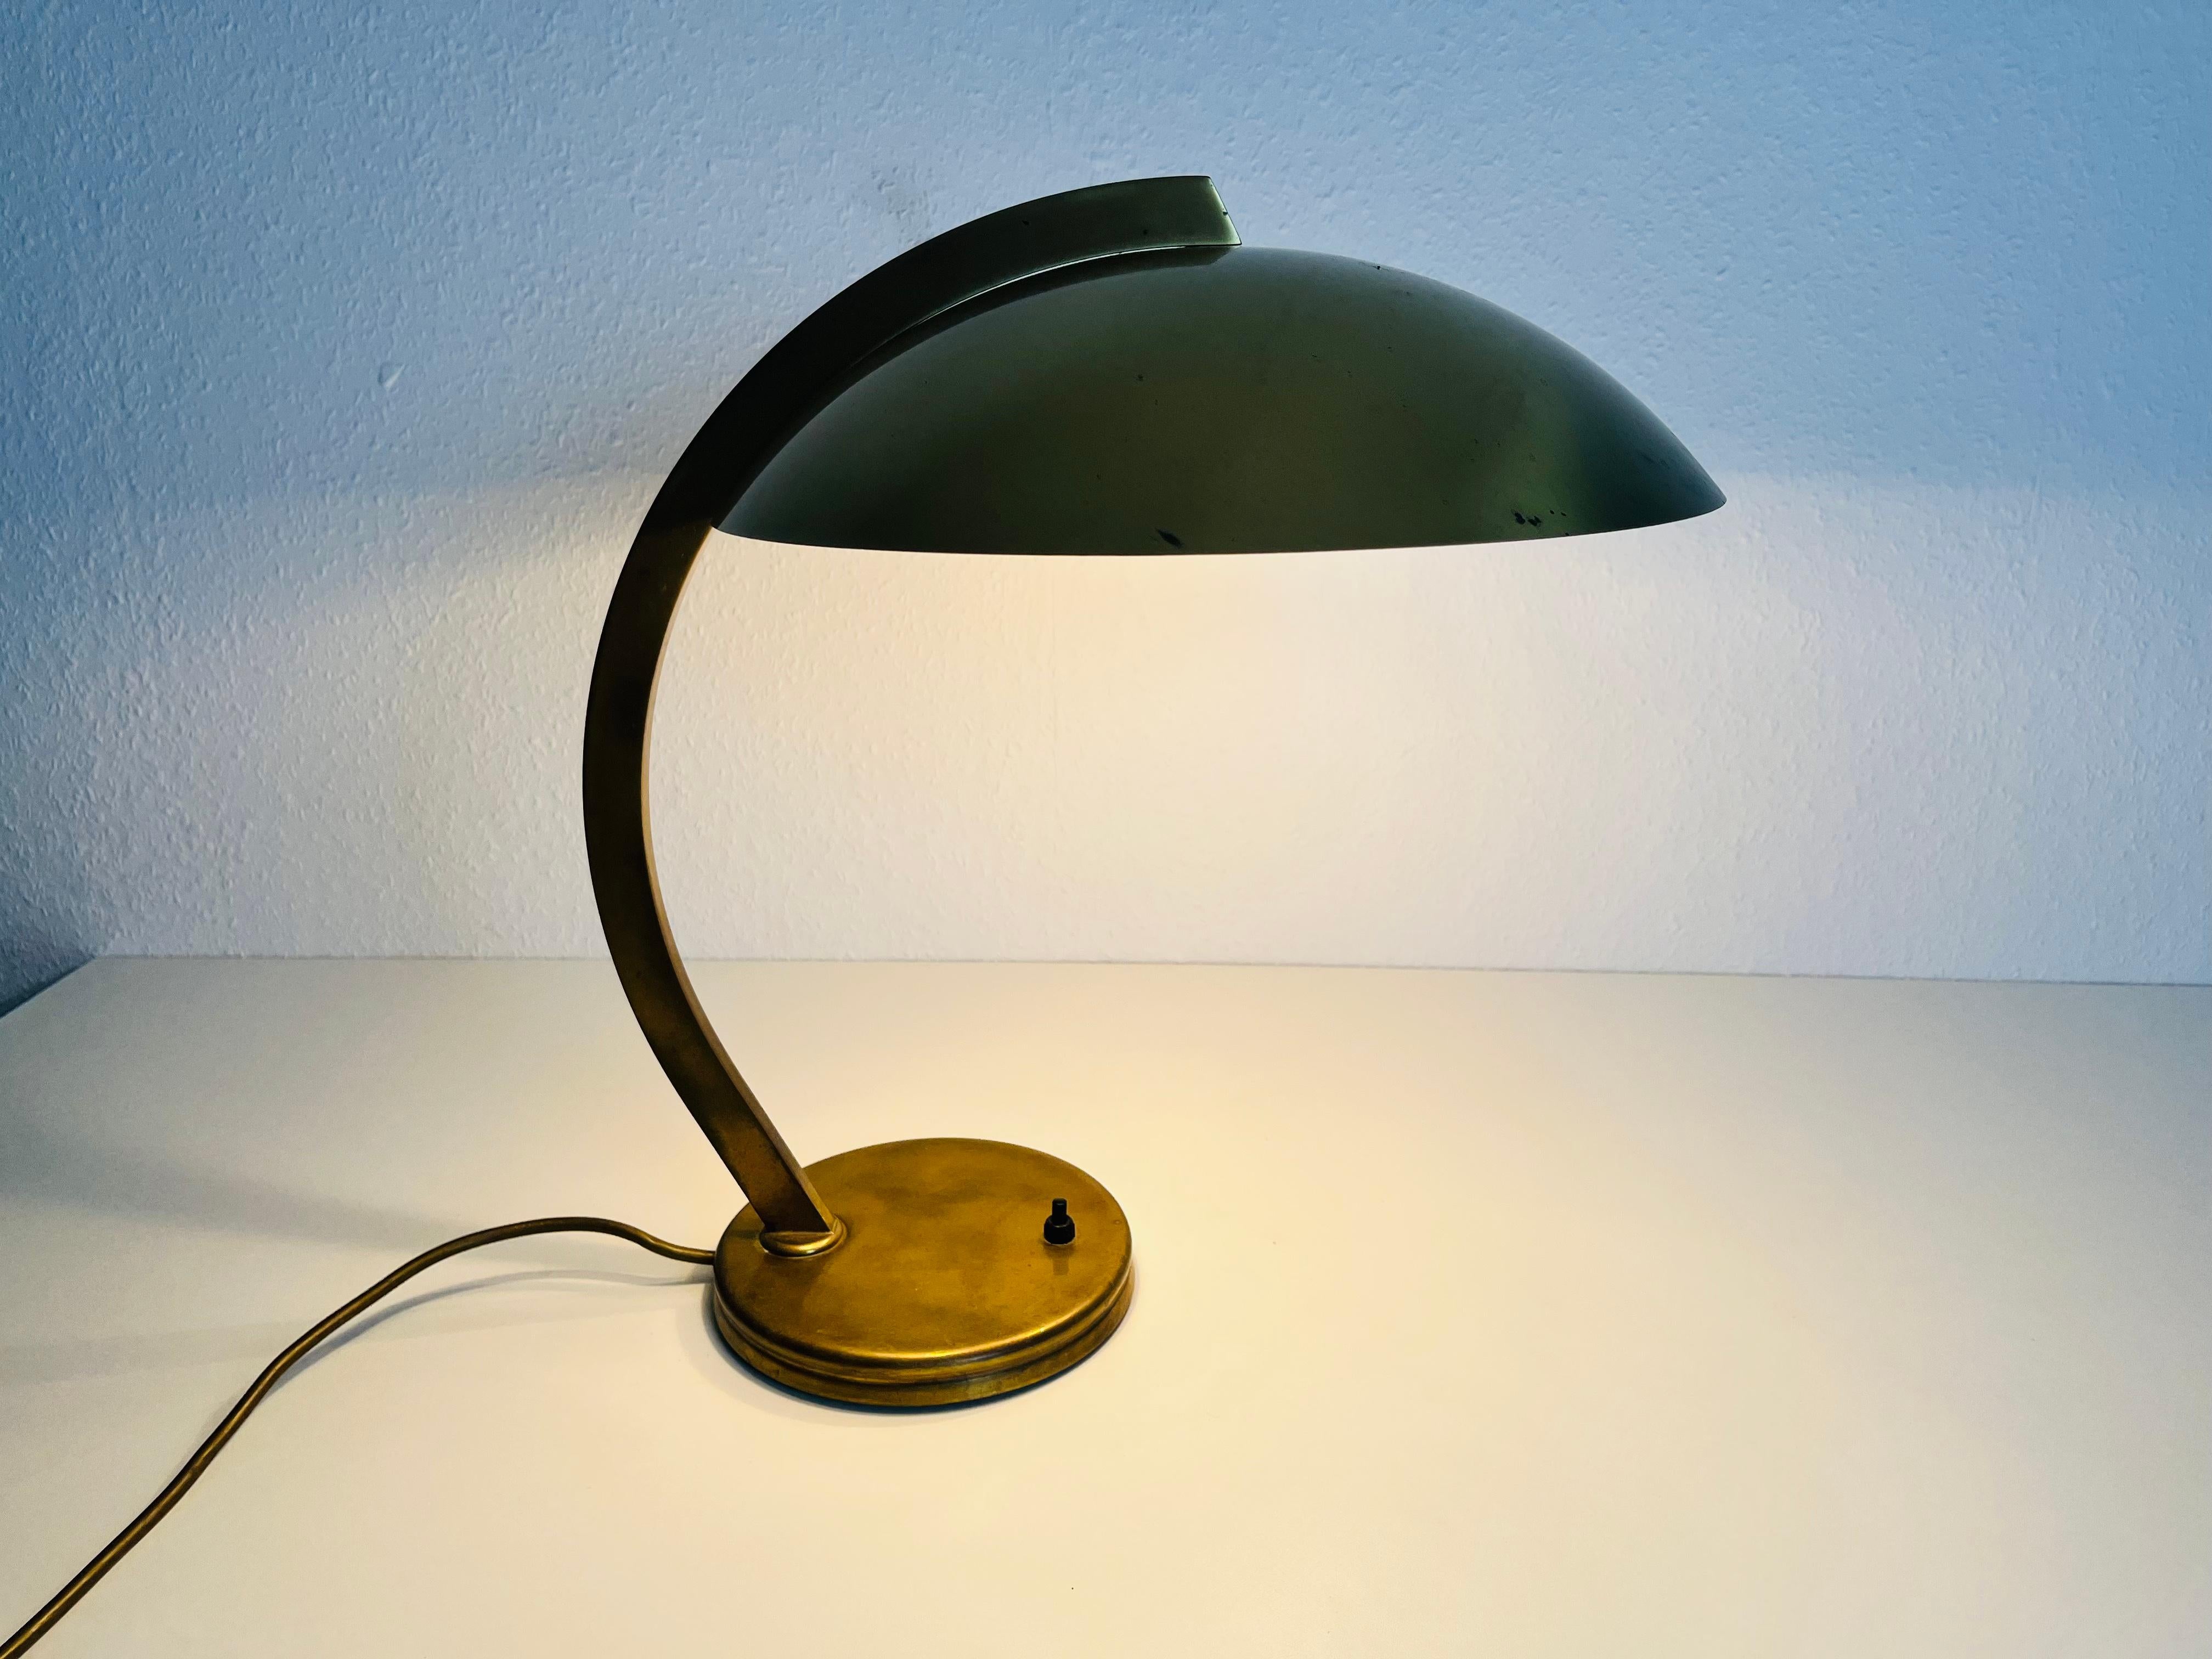 Hillebrand Midcentury Full Brass Table Lamp, 1960s, Germany For Sale 8